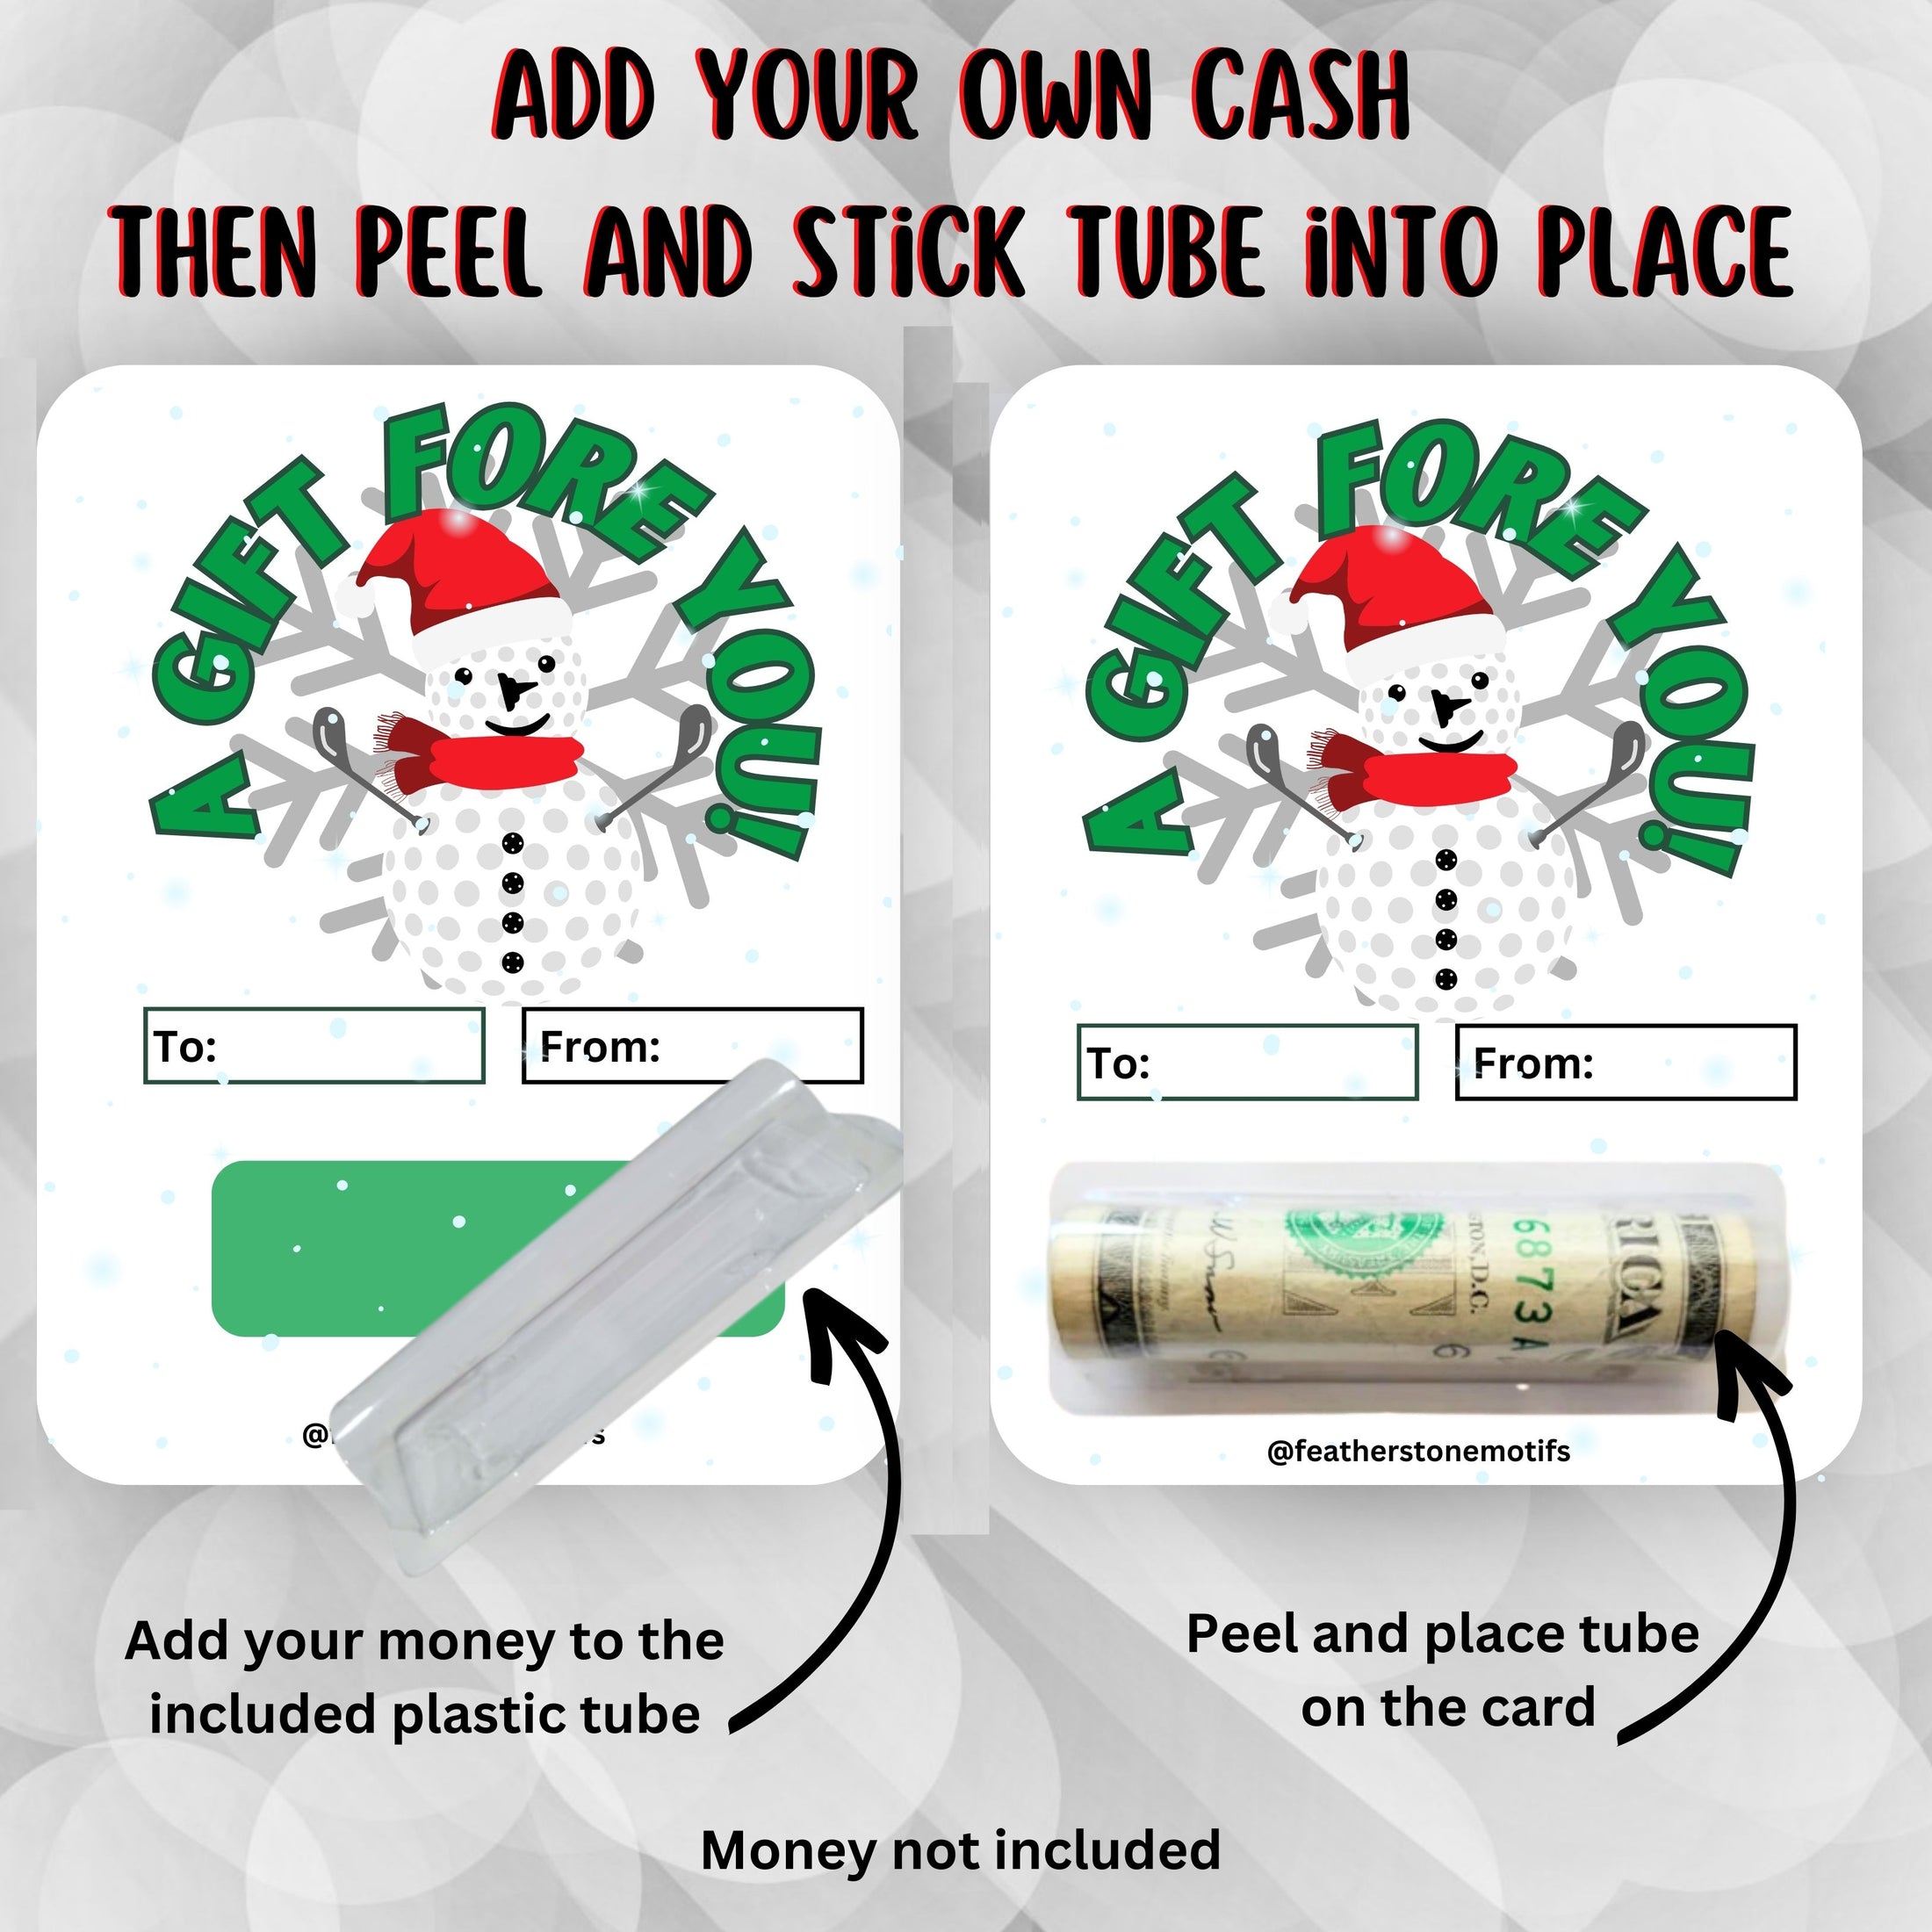 This image show how to attach the money tube to the Fore Snowman money card.